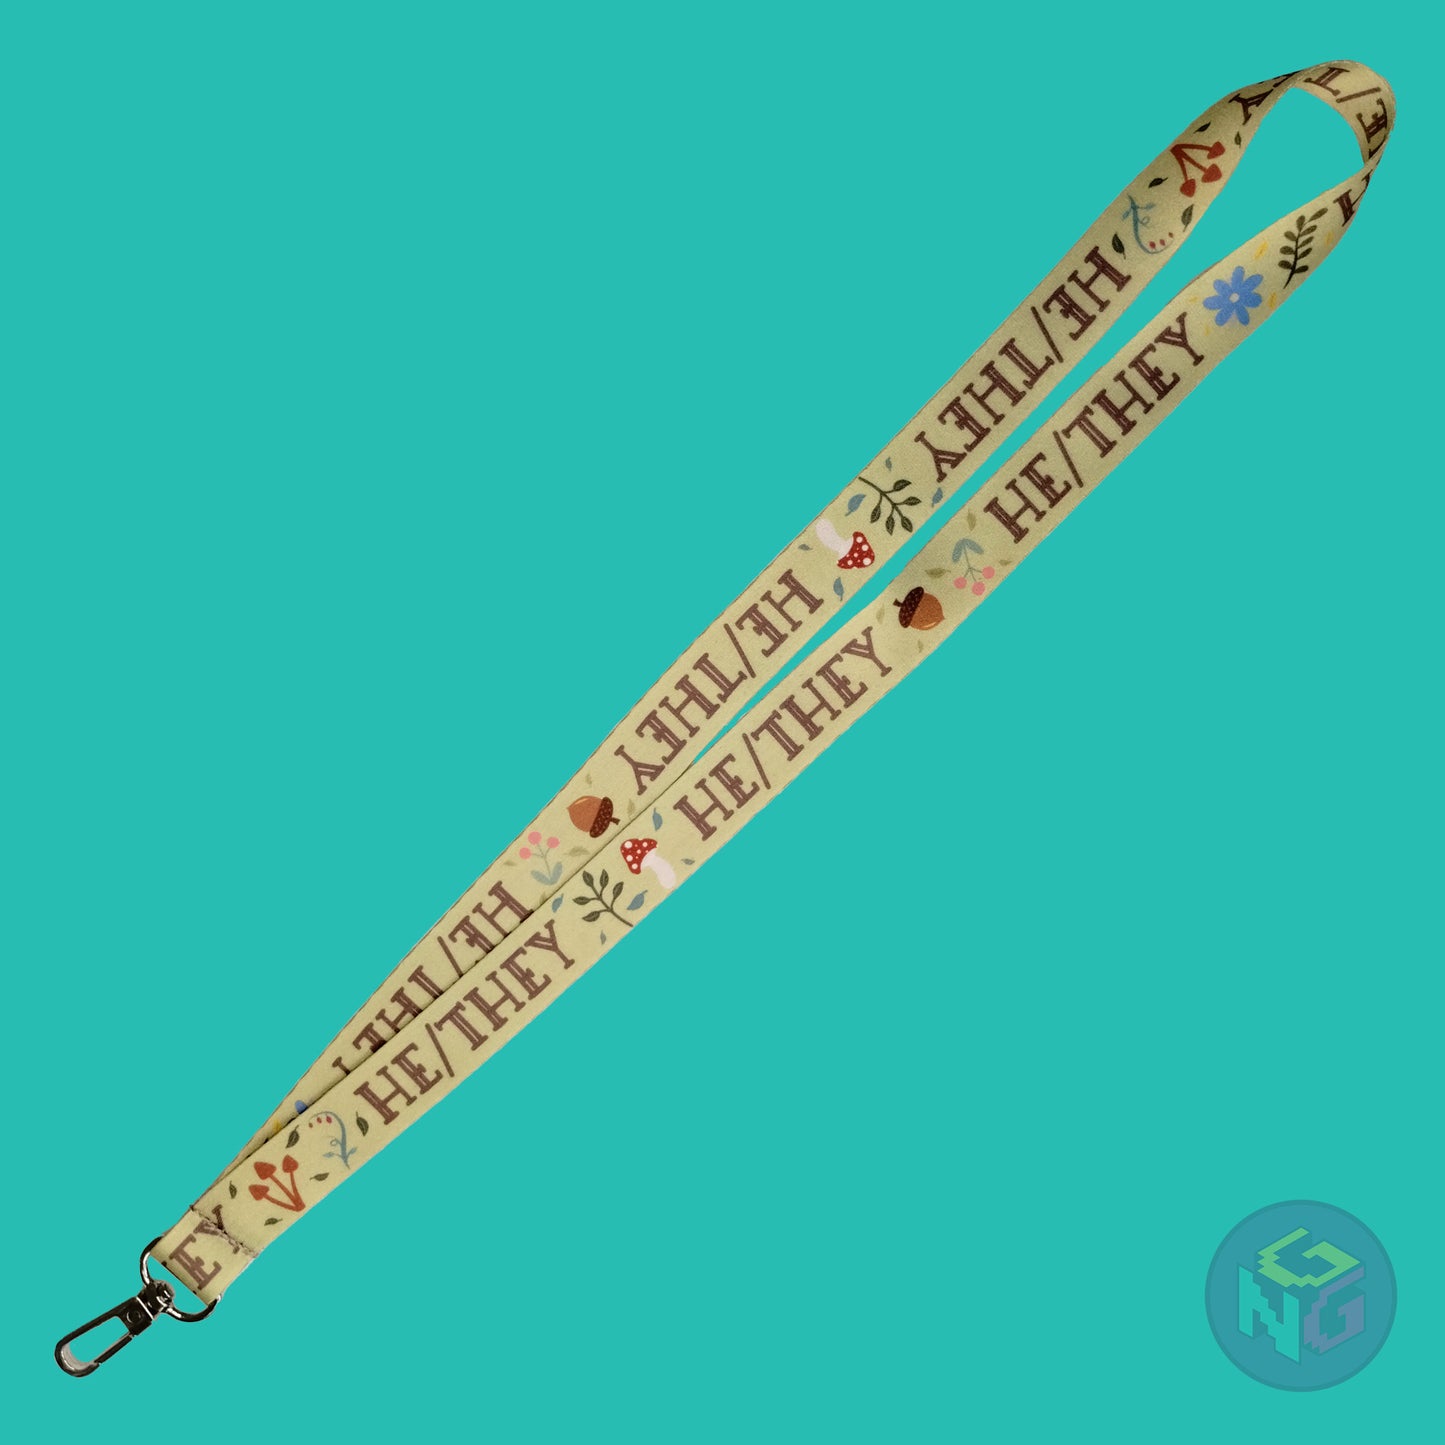 the green he they cottagecore lanyard lying flat showing the complete design and repeating pattern of acorns, berries, mushrooms, leaves, and he they pronouns